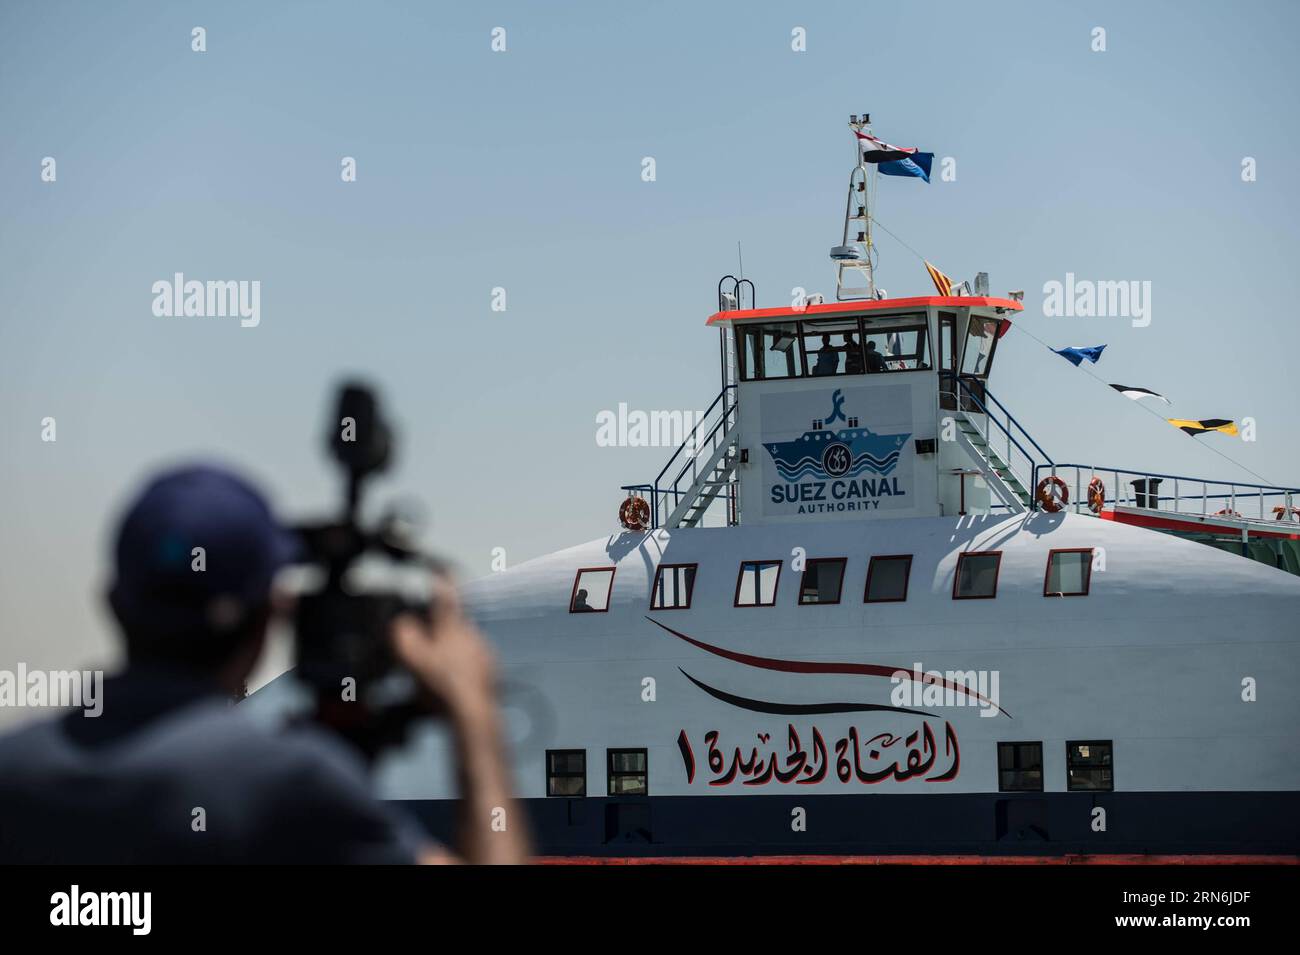 WIRTSCHAFT Ägypten: Neuer Suezkanal fertig gestellt (150729) -- ISMAILIA, July 29, 2015 -- A cameraman takes video clips on the new Suez Canal in Ismailia, a port city in Egypt, on July 29, 2015. The dredging work of Egypt s New Suez Canal has been completed and the waterway is ready as well as safe for huge ship navigation, Mohab Memish, head of the Suez Canal Authority (SCA), told reporters in a press conference Wednesday. ) EGYPT-ISMAILIA-NEW SUEZ CANAL PanxChaoyue PUBLICATIONxNOTxINxCHN   Economy Egypt later Suez Canal ready asked 150729 Ismailia July 29 2015 a cameraman Takes Video Clips Stock Photo